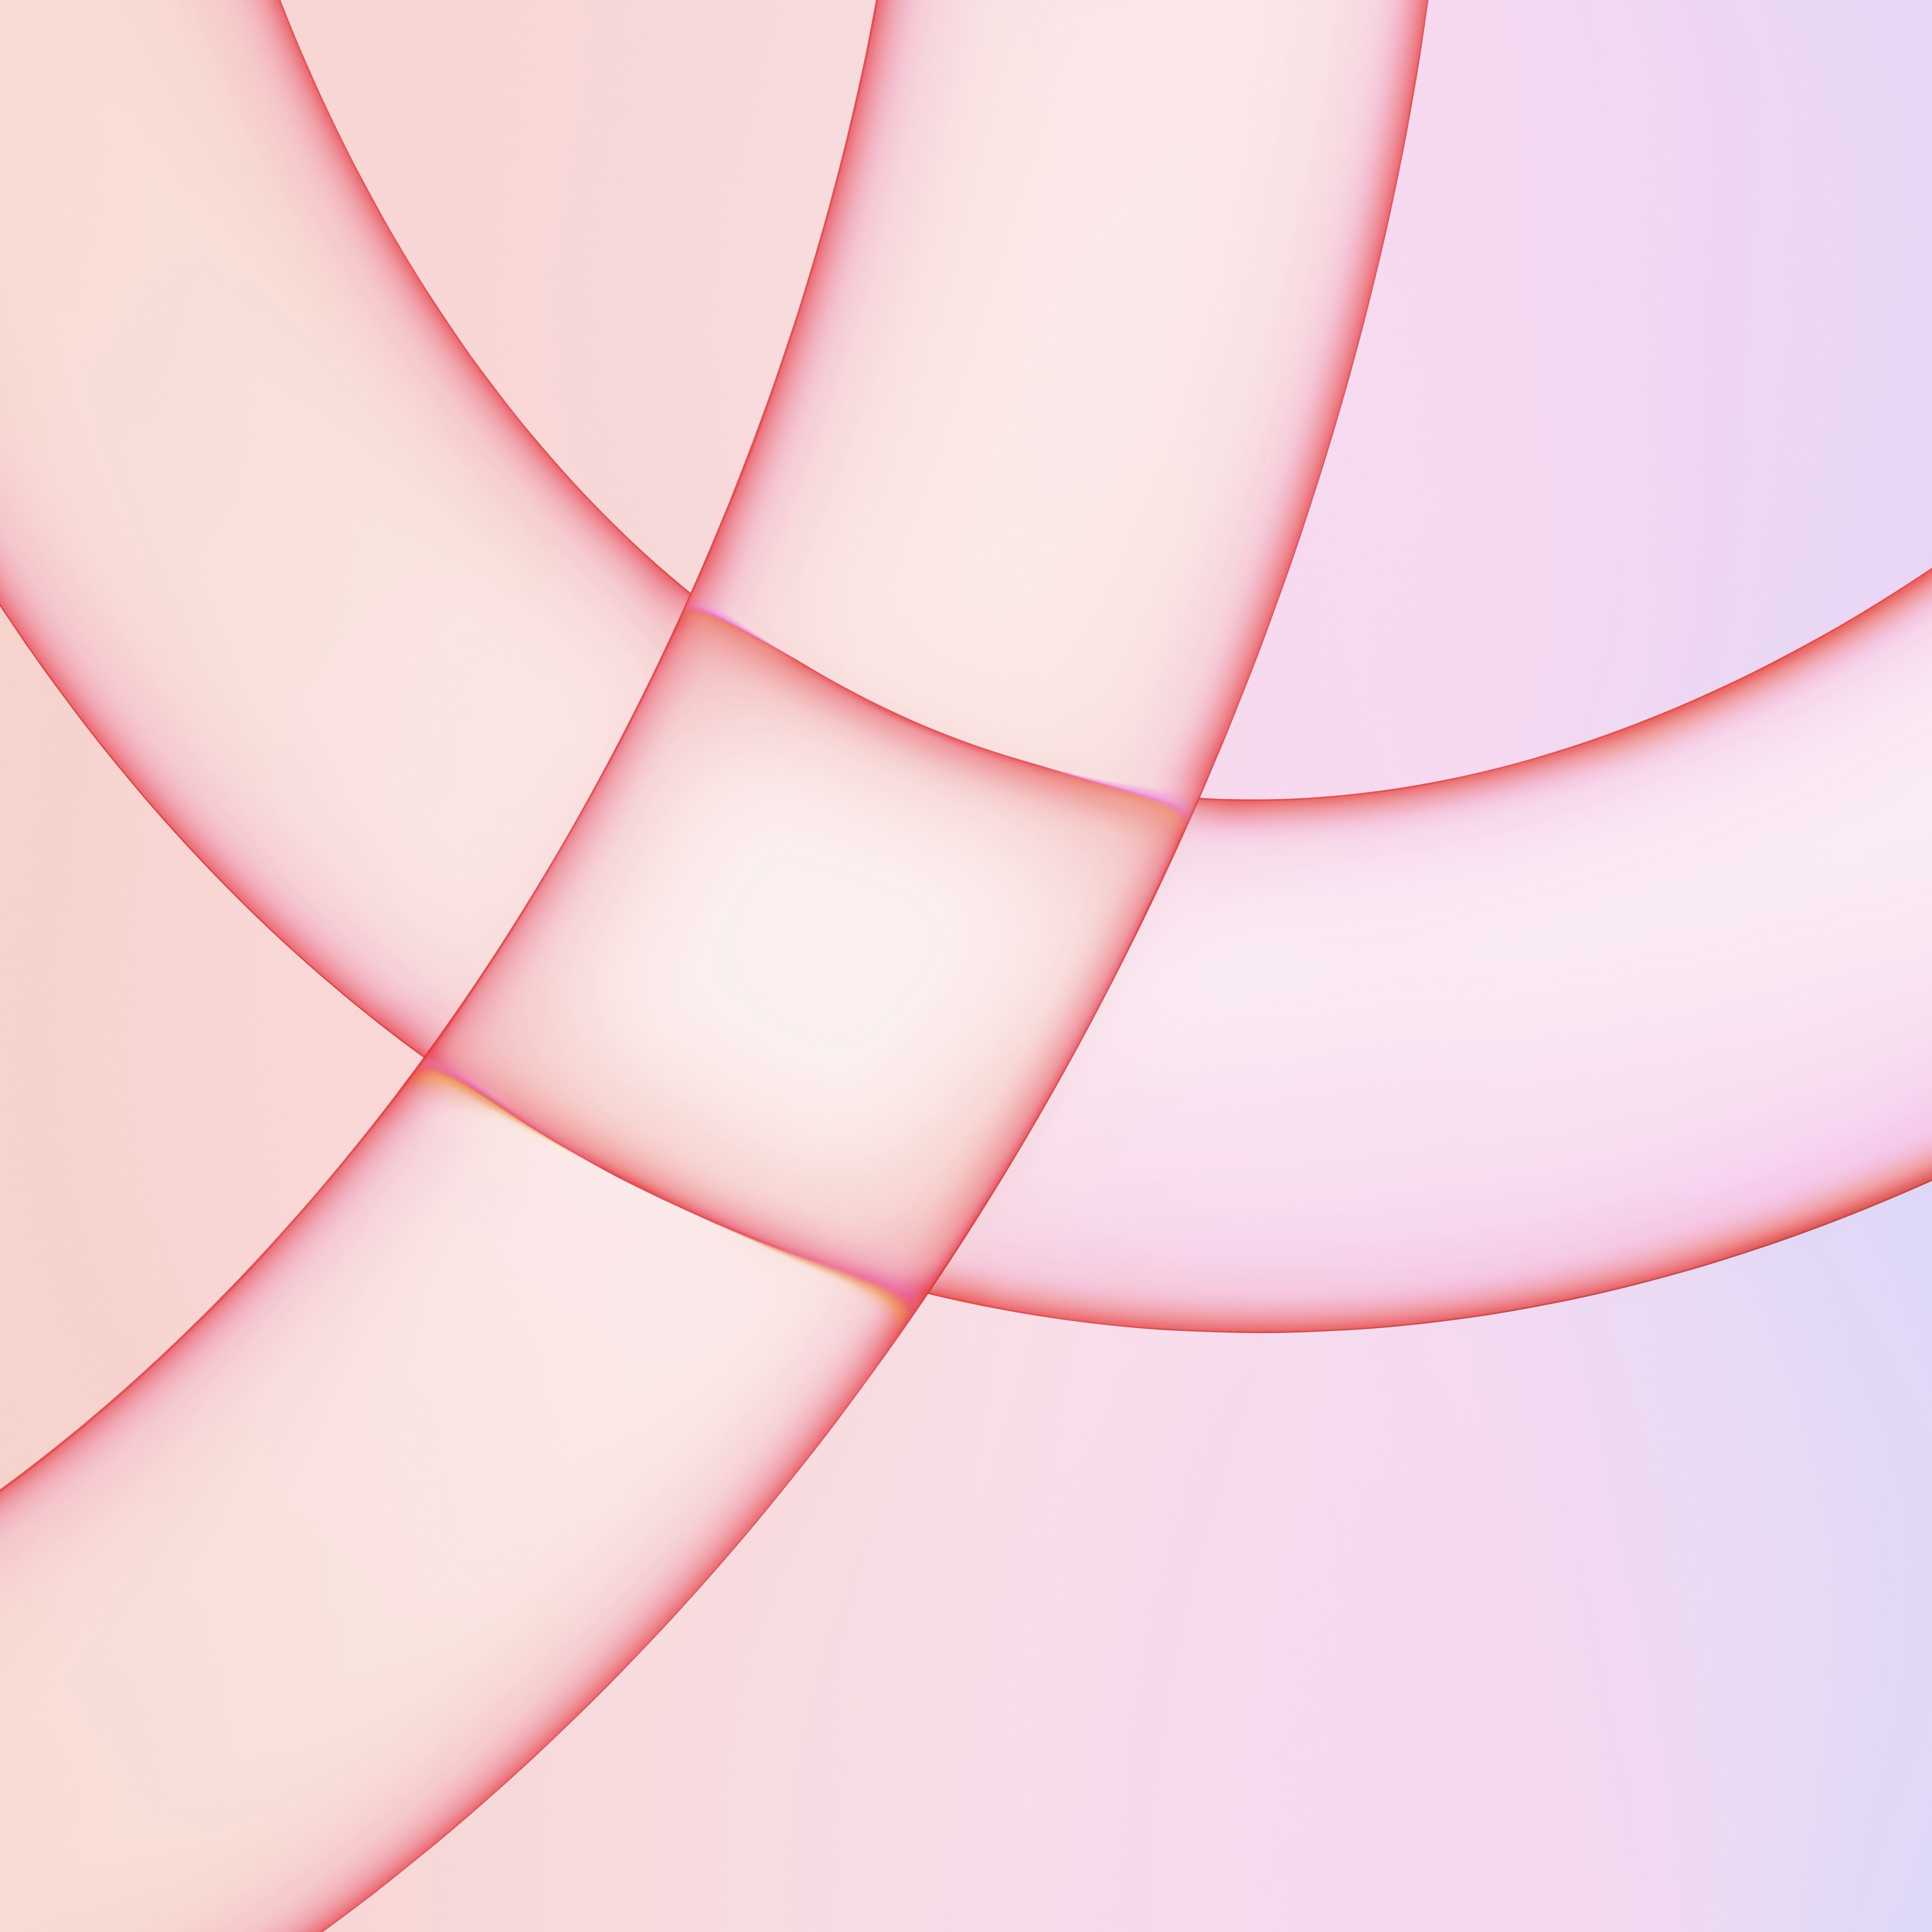 A Pink Gradient Wallpaper  Free Stock Photo